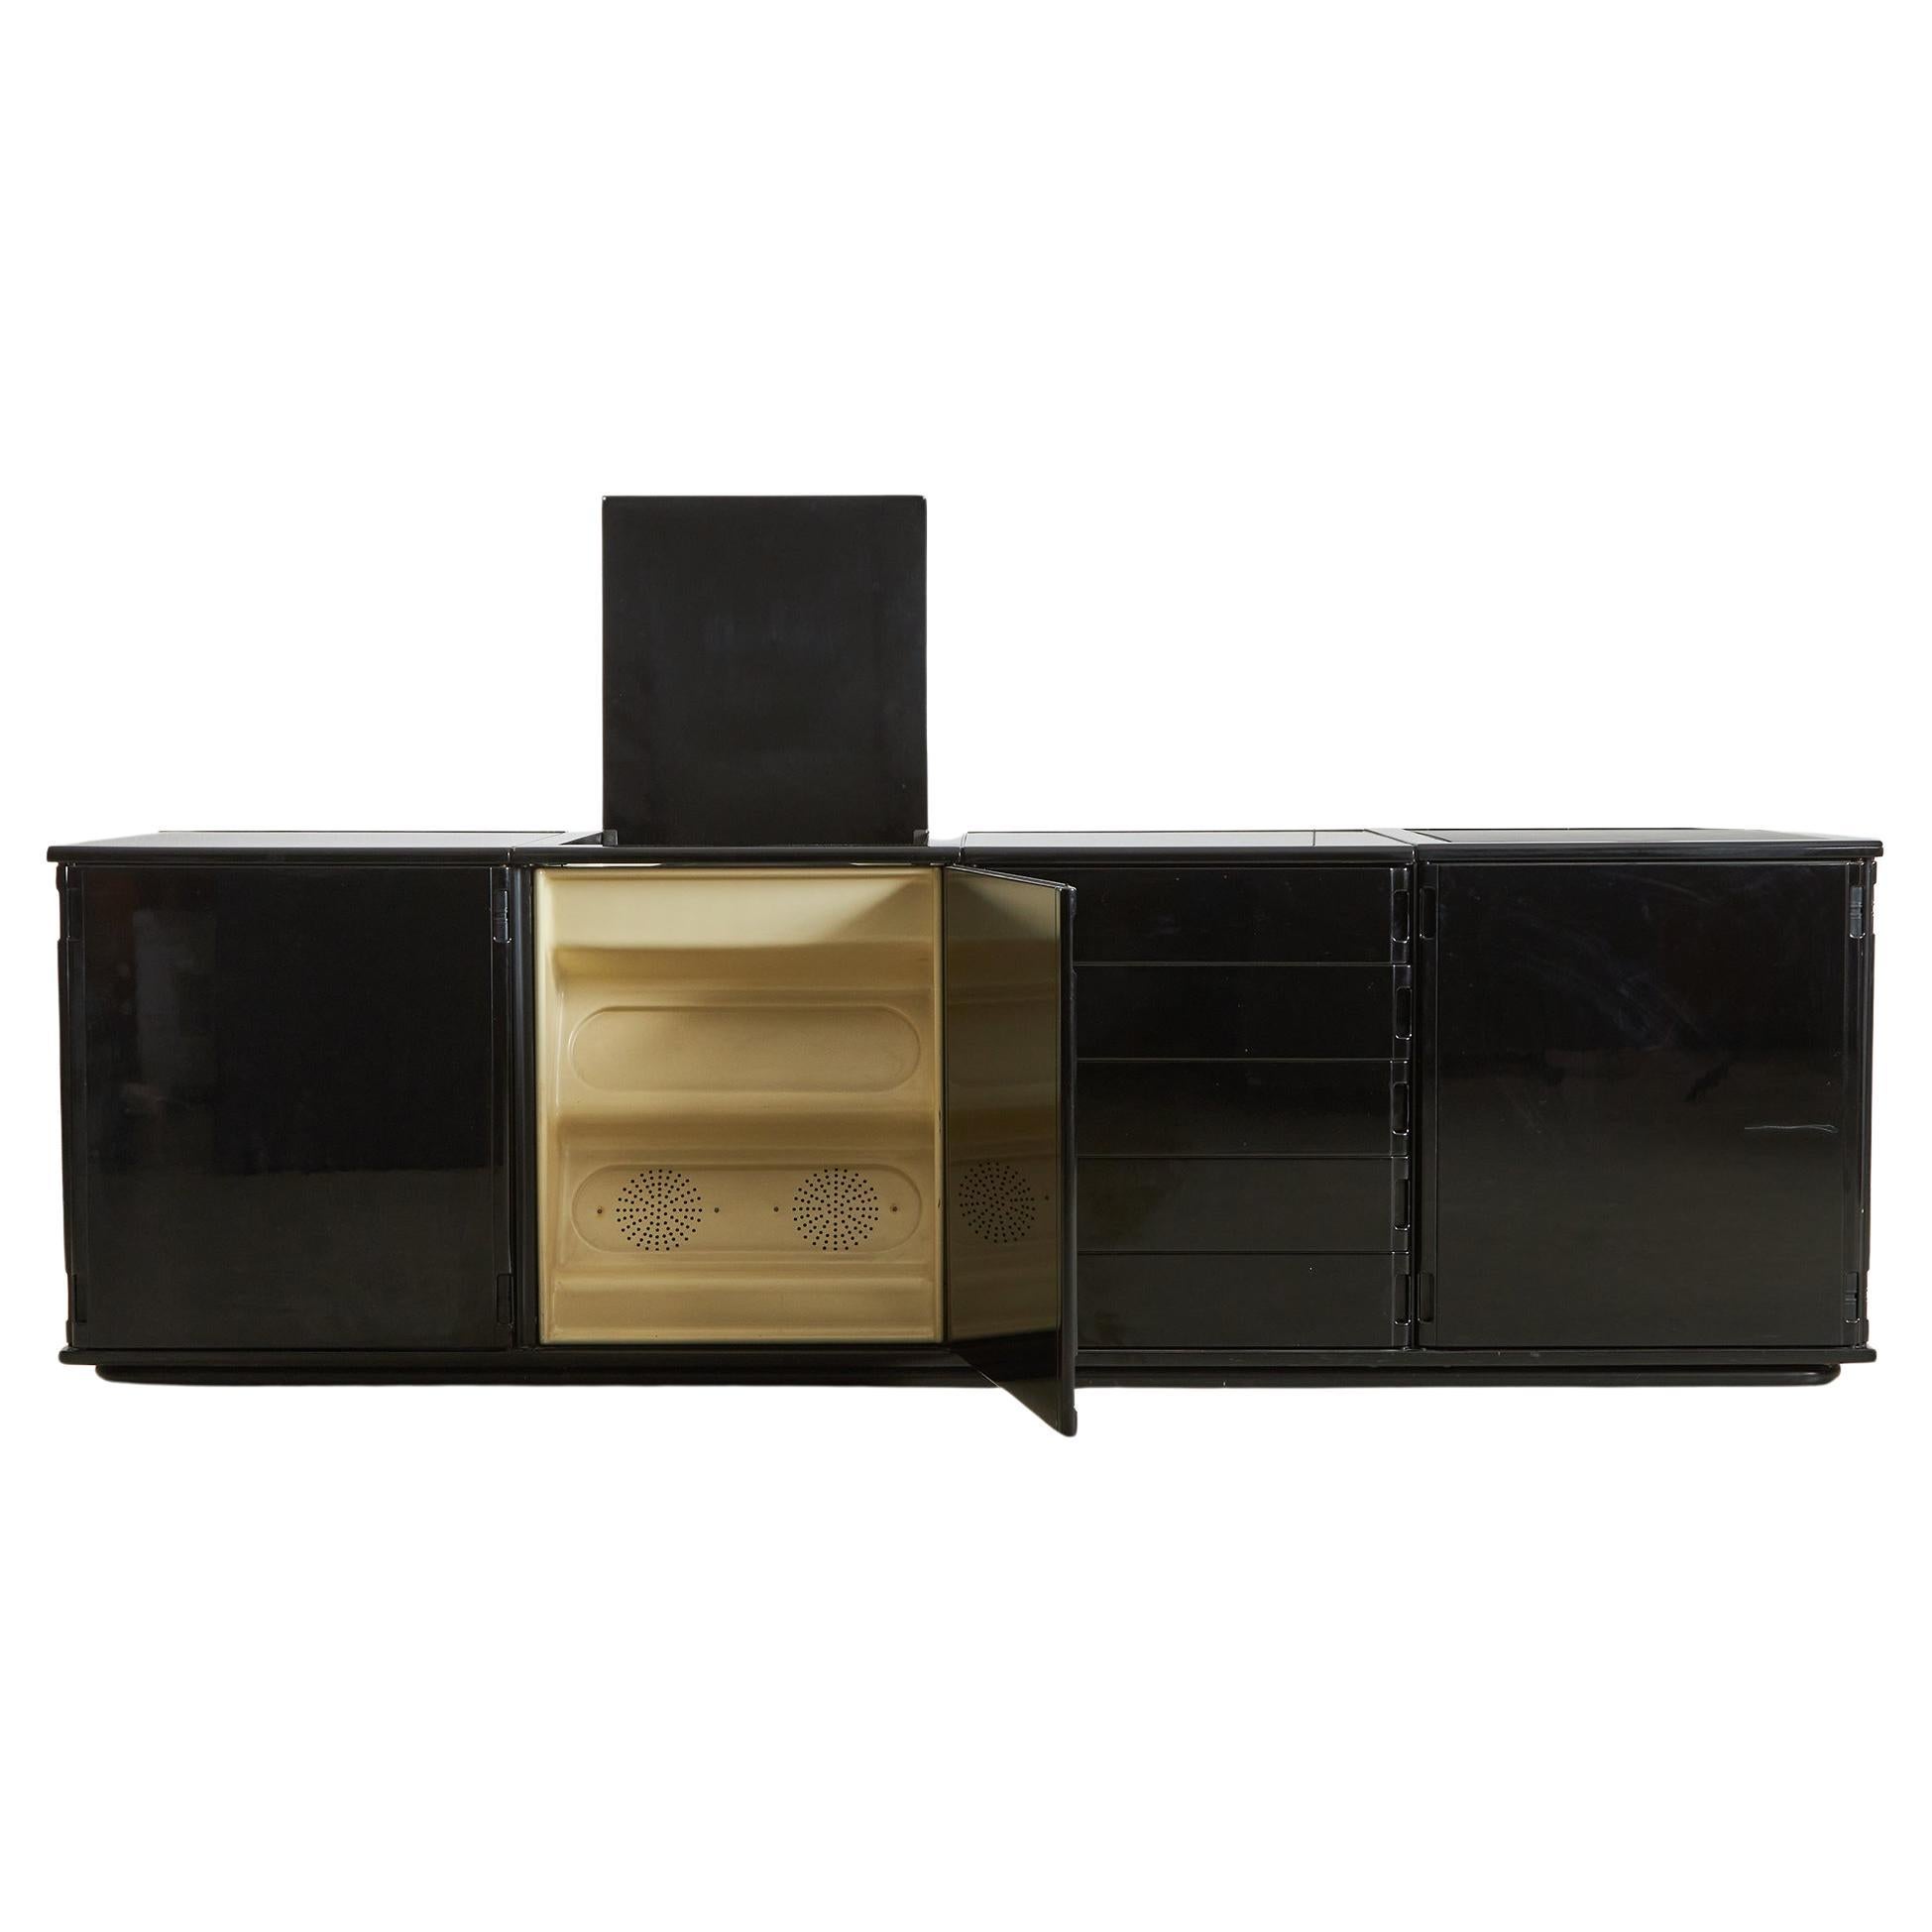 Larco Series Sideboard by Gianfranco Frattini for Molteni, 1970s For Sale